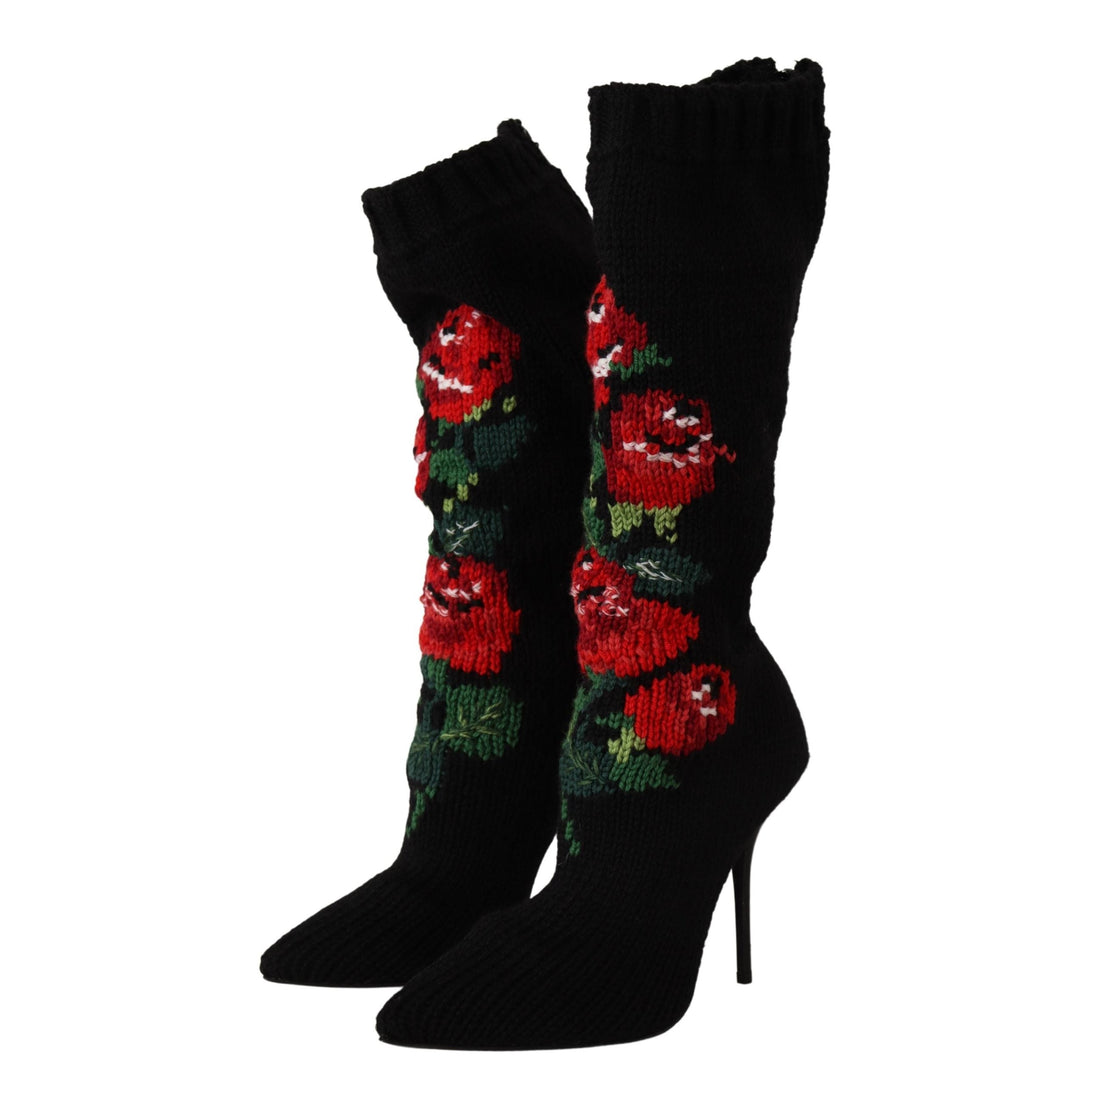 Dolce & Gabbana Black Stretch Socks Red Roses Booties Shoes